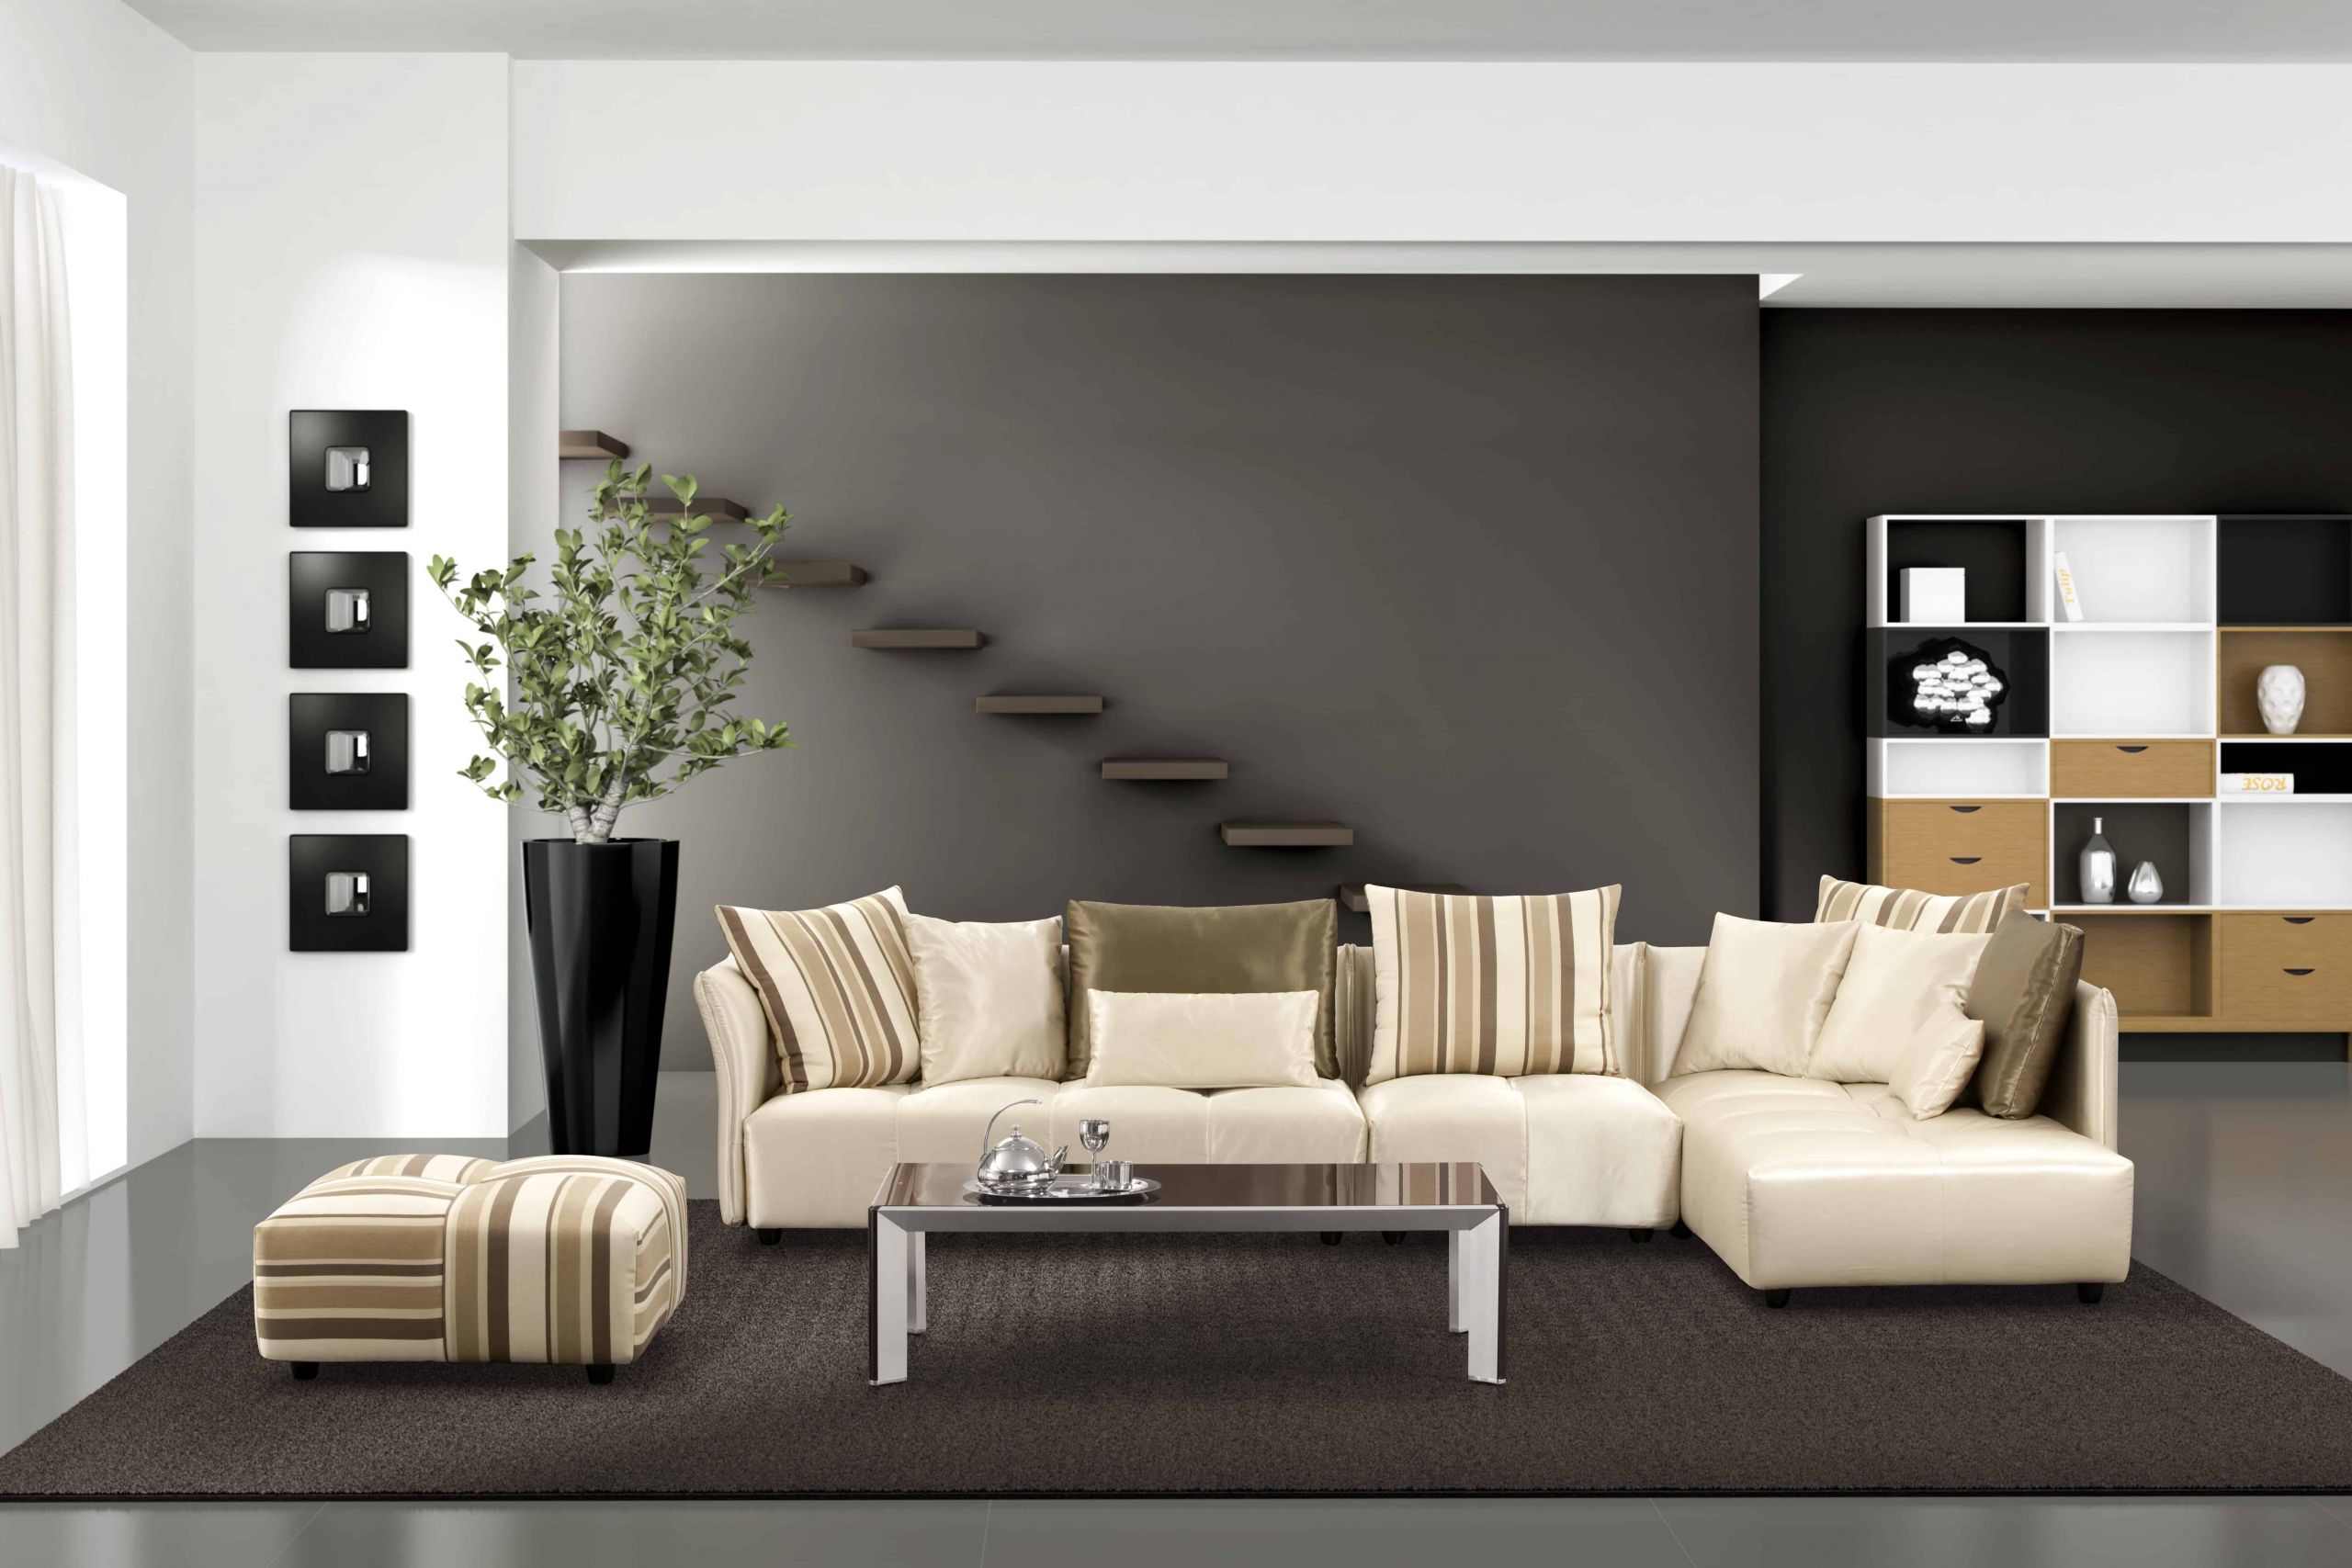 Living Room Painting
 Living Room Paint Ideas with the Proper Color Decoration